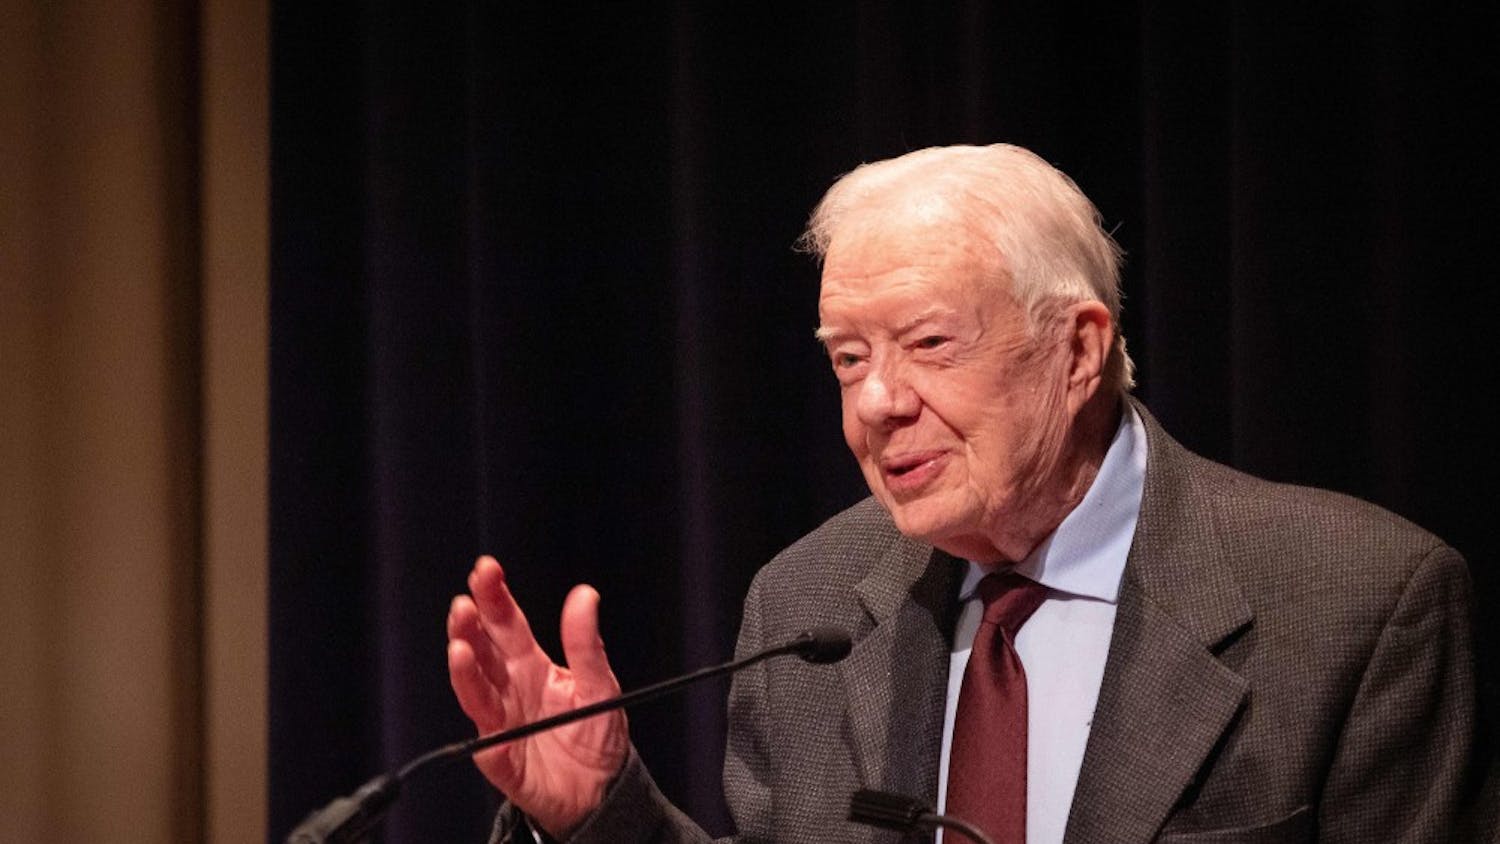 Former President Jimmy Carter fell Monday at his home in Plains and suffered a "minor pelvic fracture," the Carter Center tweeted Tuesday morning.